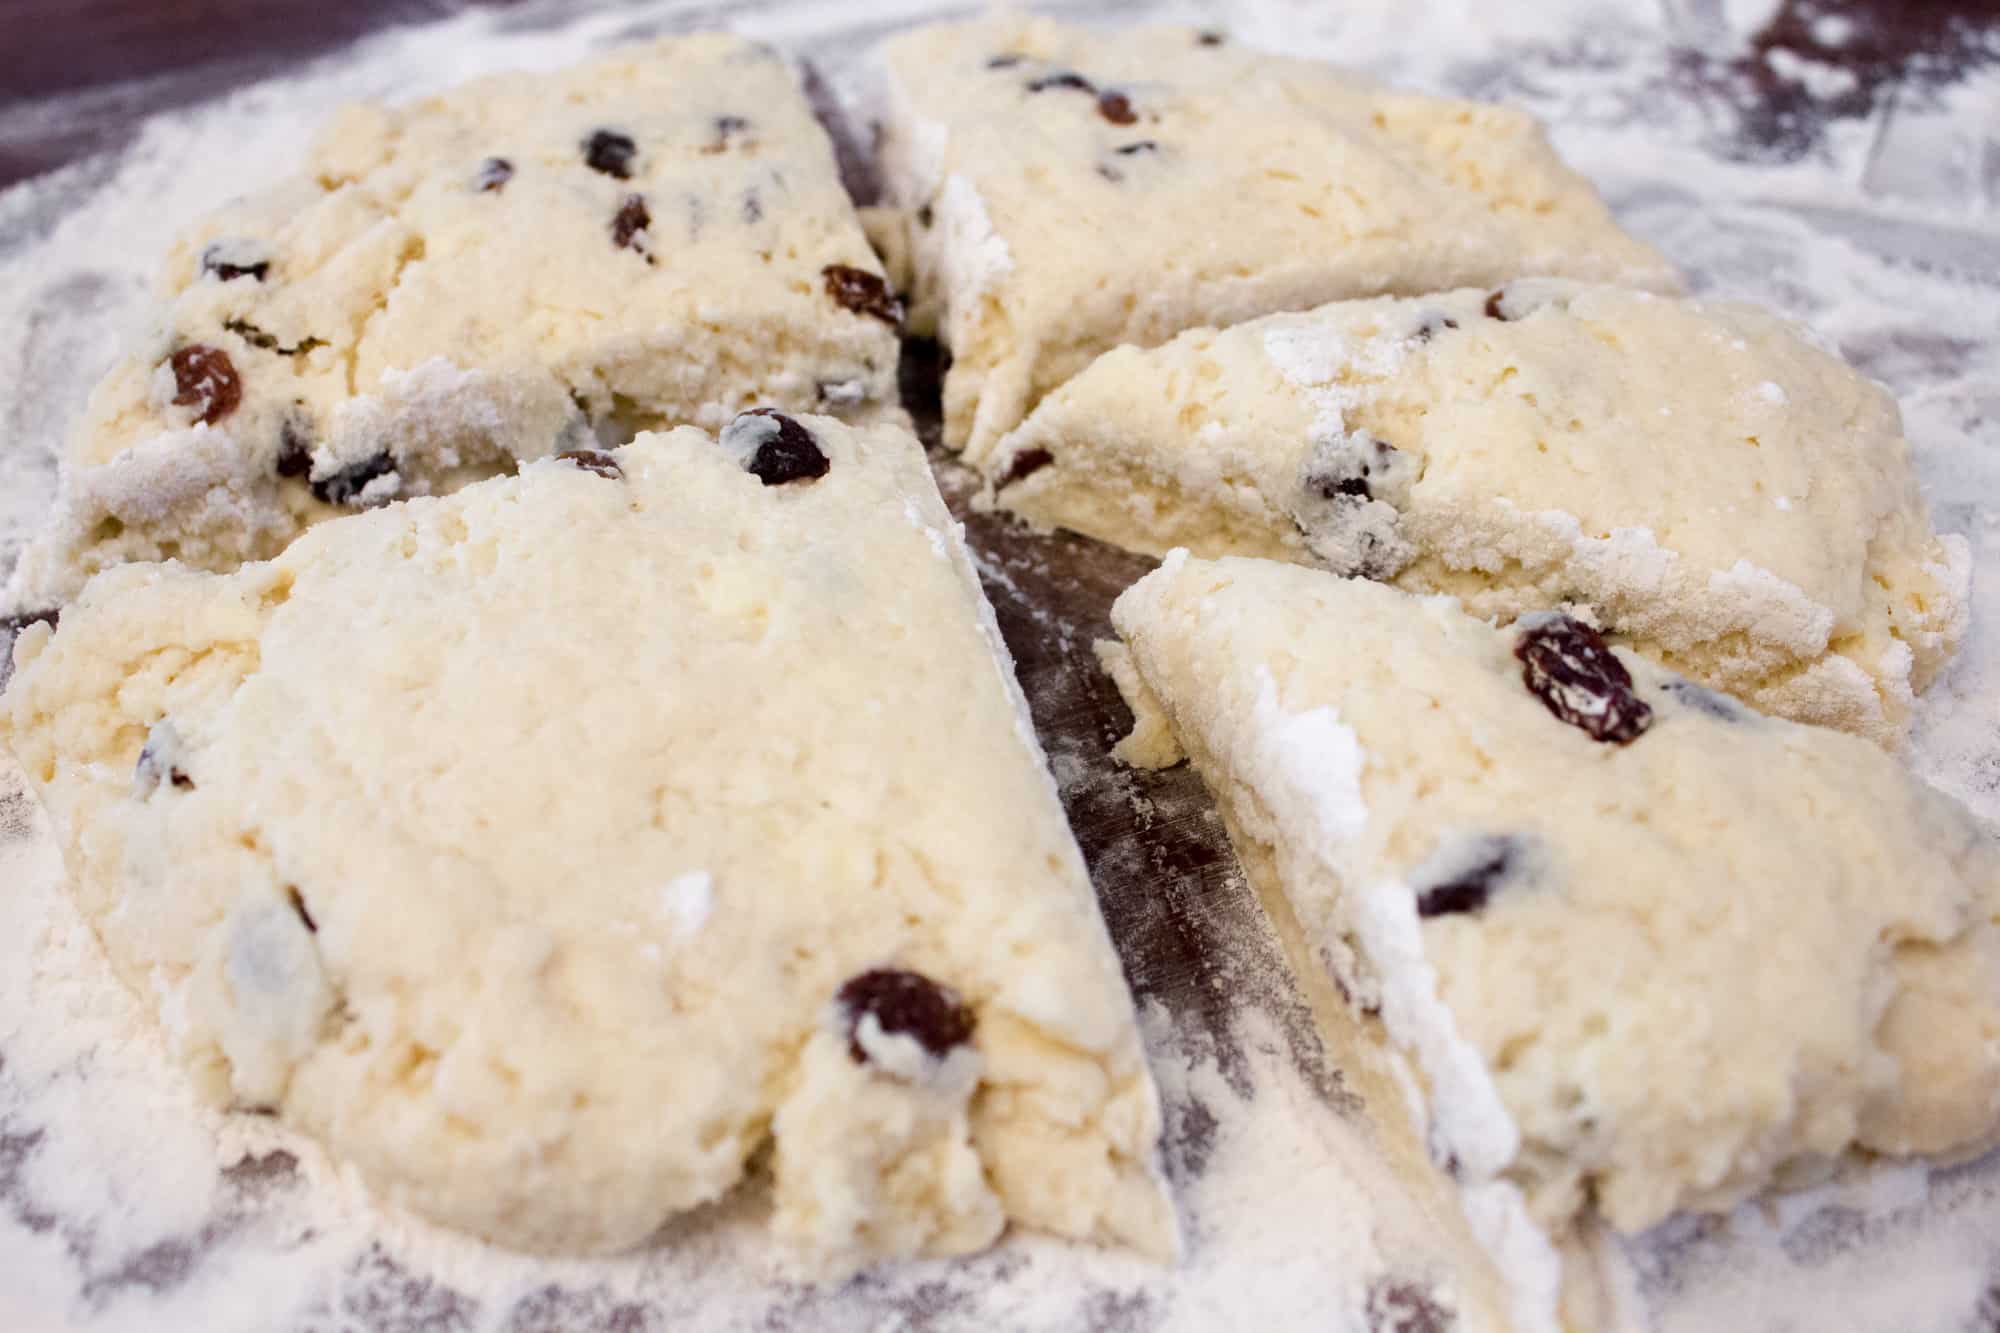 These raisin scones are buttery and flaky baked biscuits. Super easy to make and bake. The raisins can be substituted with dried cranberries or some fresh blueberries, strawberries etc.